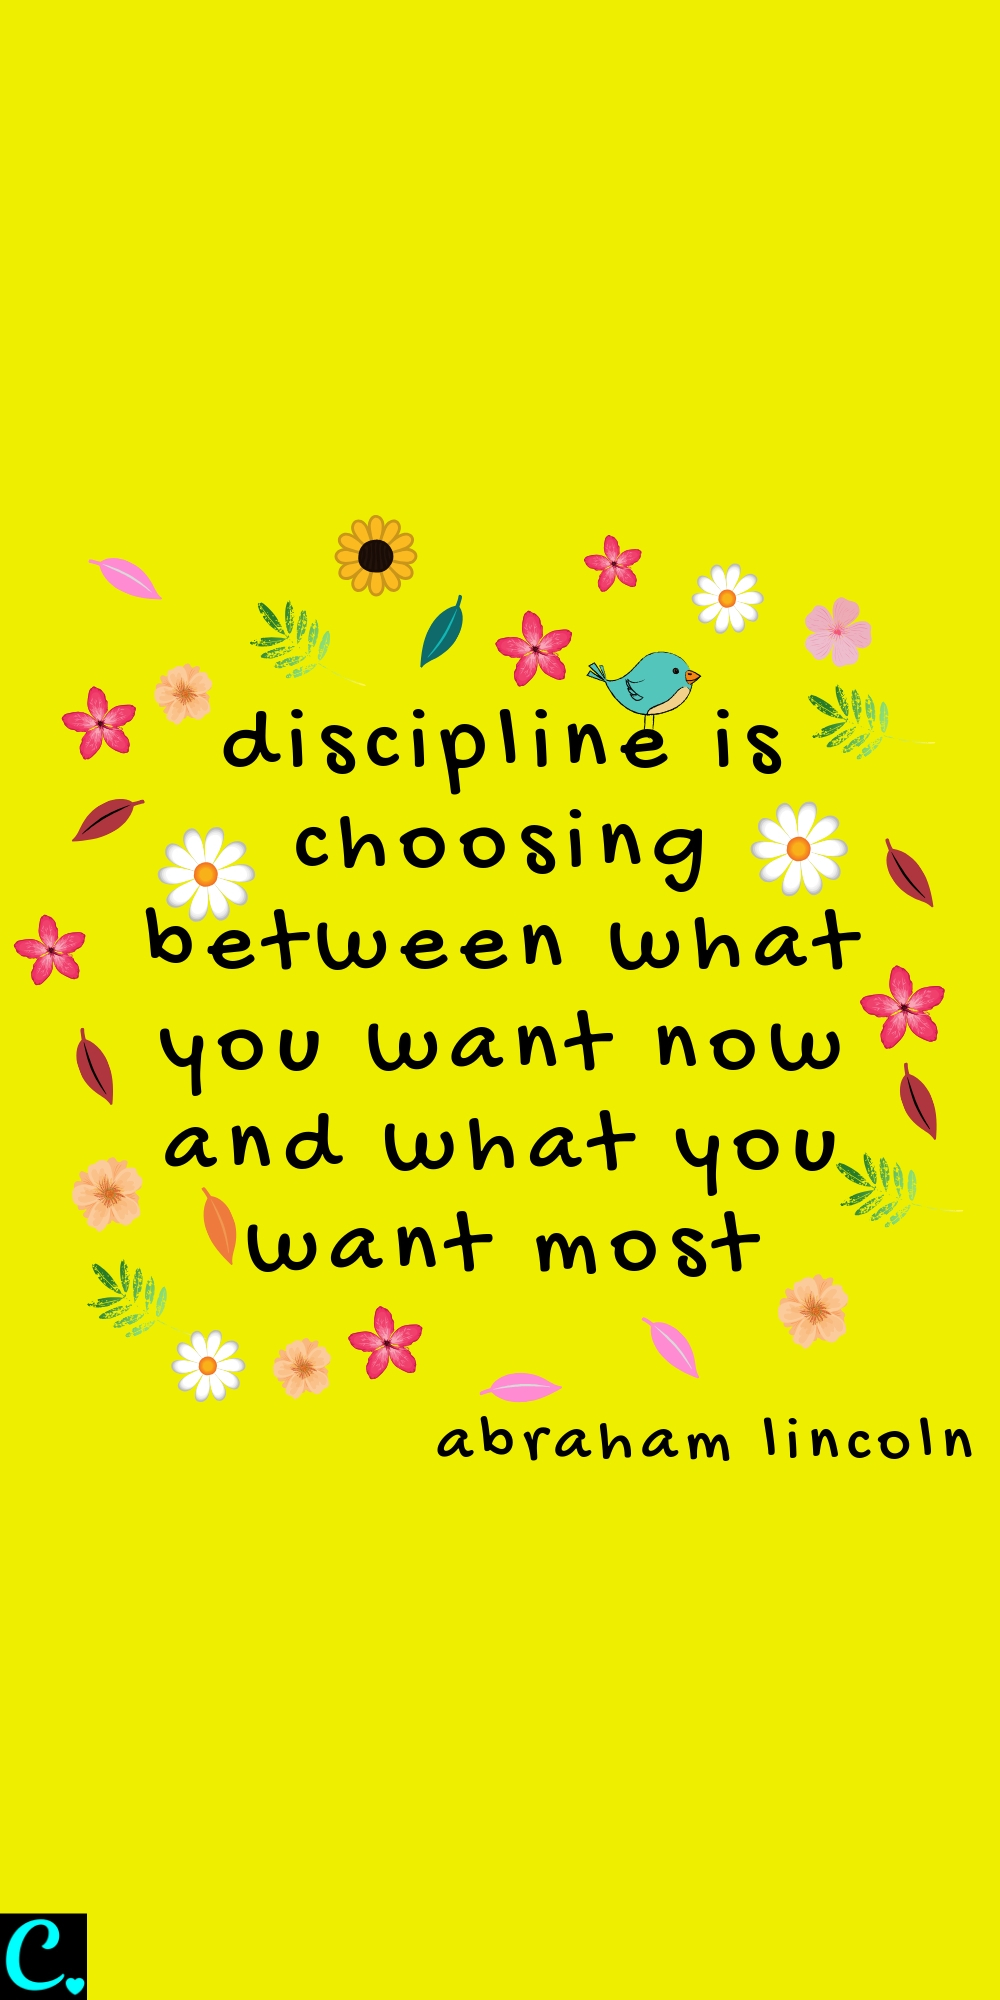 discipline is choosing between what you want now and what you want most - Abraham Lincoln Quote about discipline #productivityquotes #productivity #successquotes #success